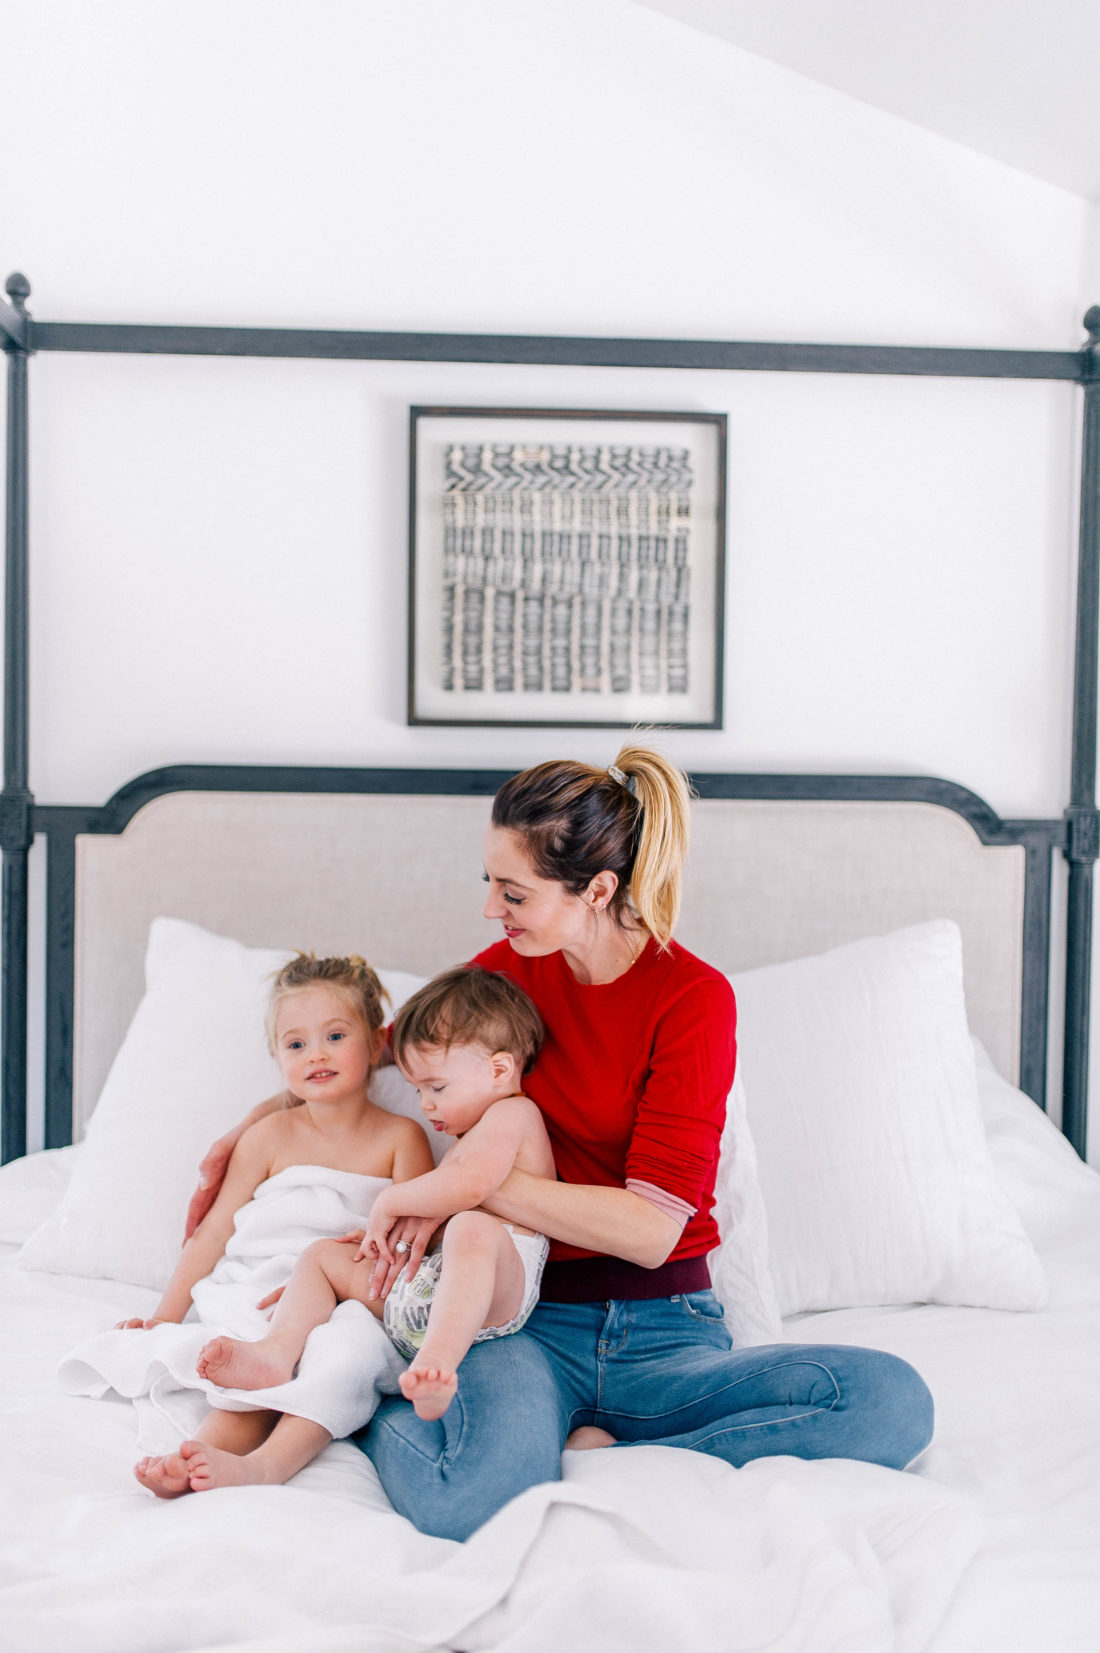 Eva Amurri Martino sits on the master bed in her Connecticut home with her two children as she readies them for bed